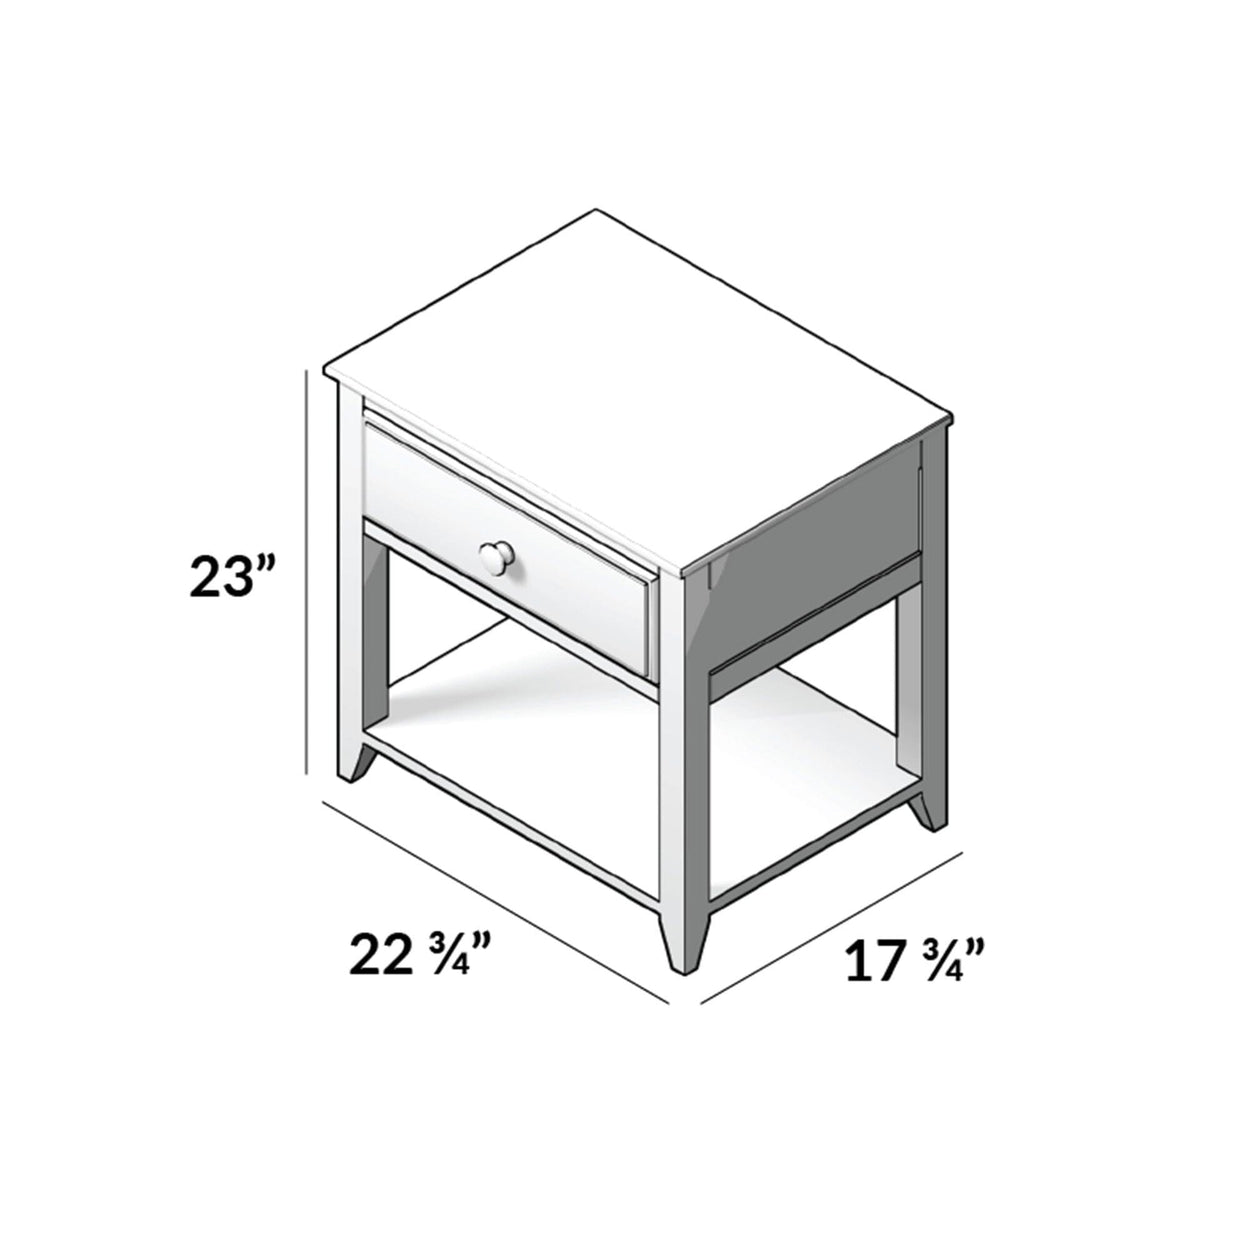 180001-002 : Furniture Nightstand with Drawer and Shelf, White